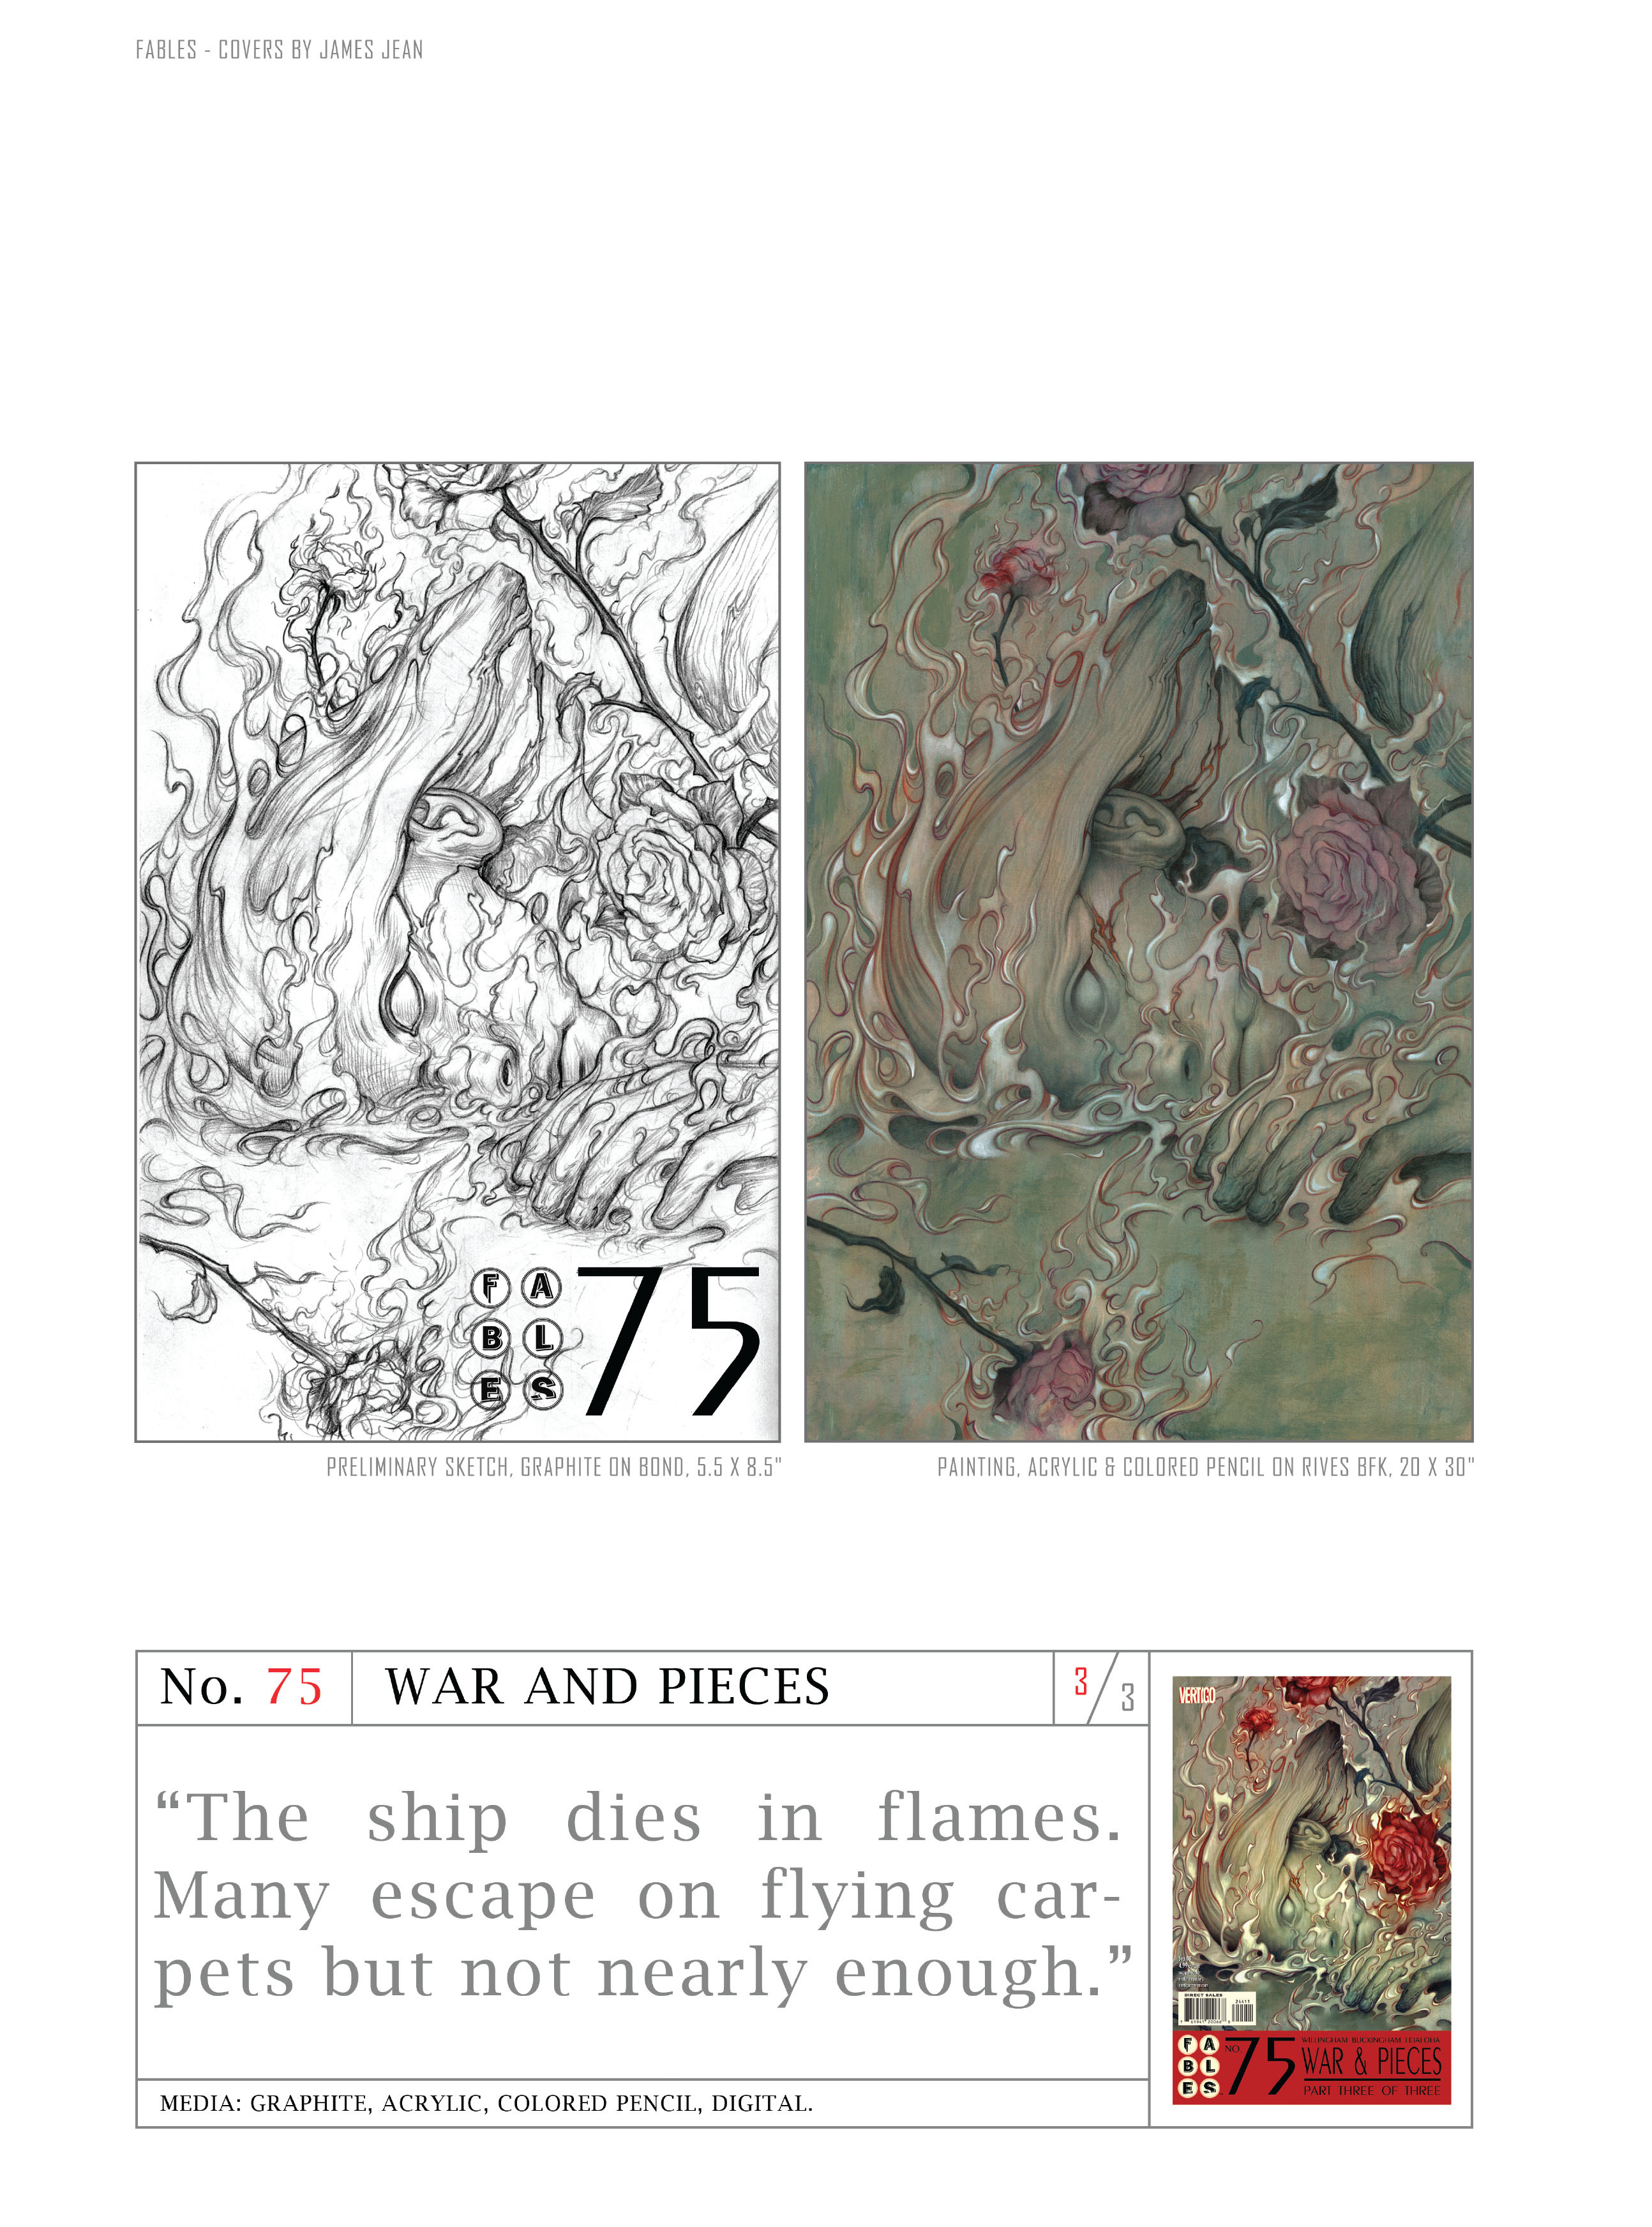 Read online Fables: Covers by James Jean comic -  Issue # TPB (Part 2) - 86